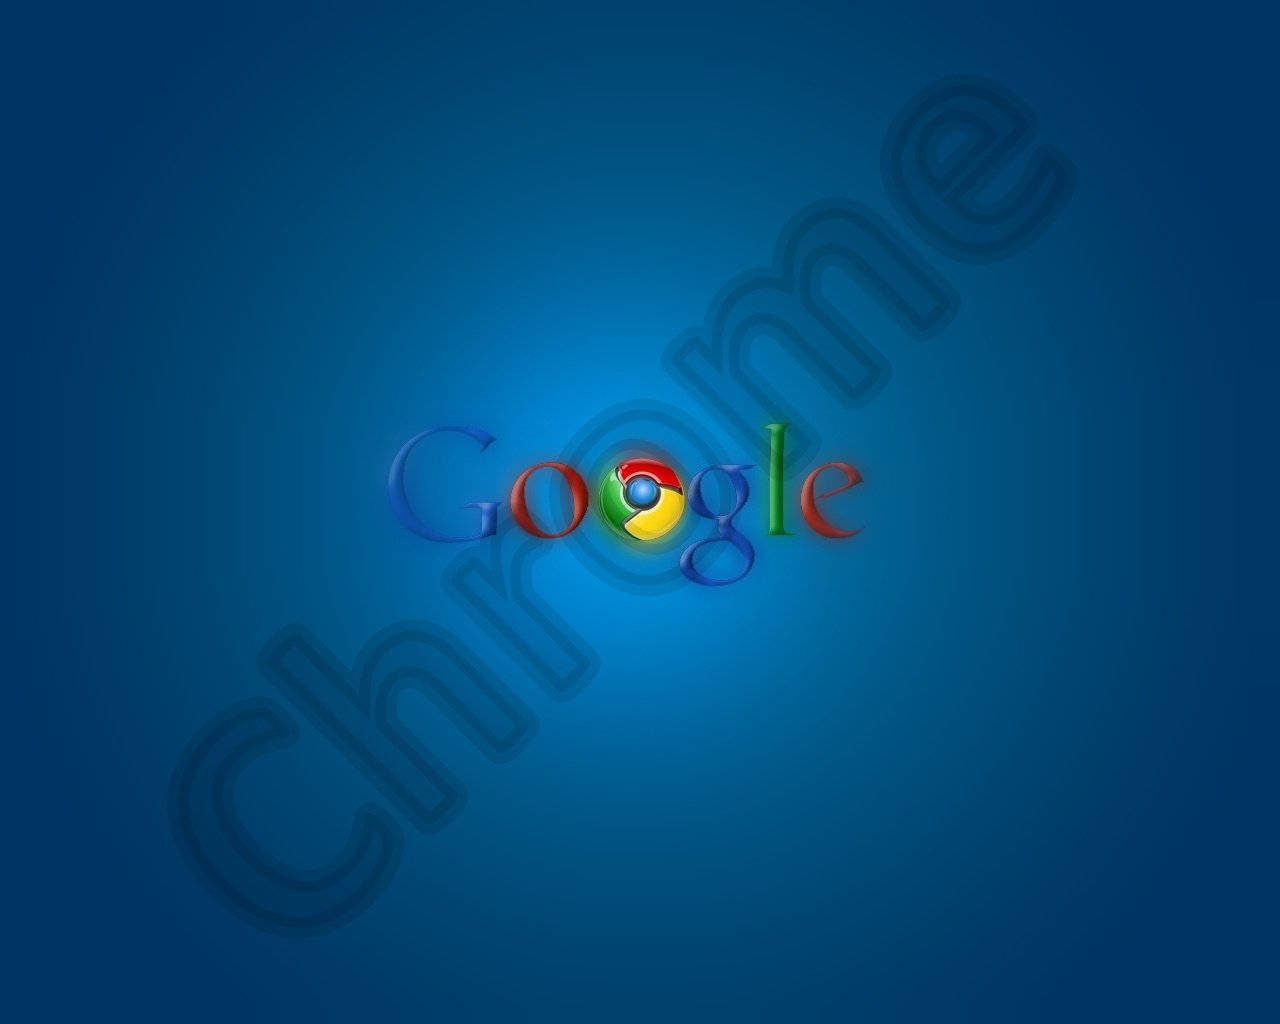 Google Chrome In Blue Shade Background